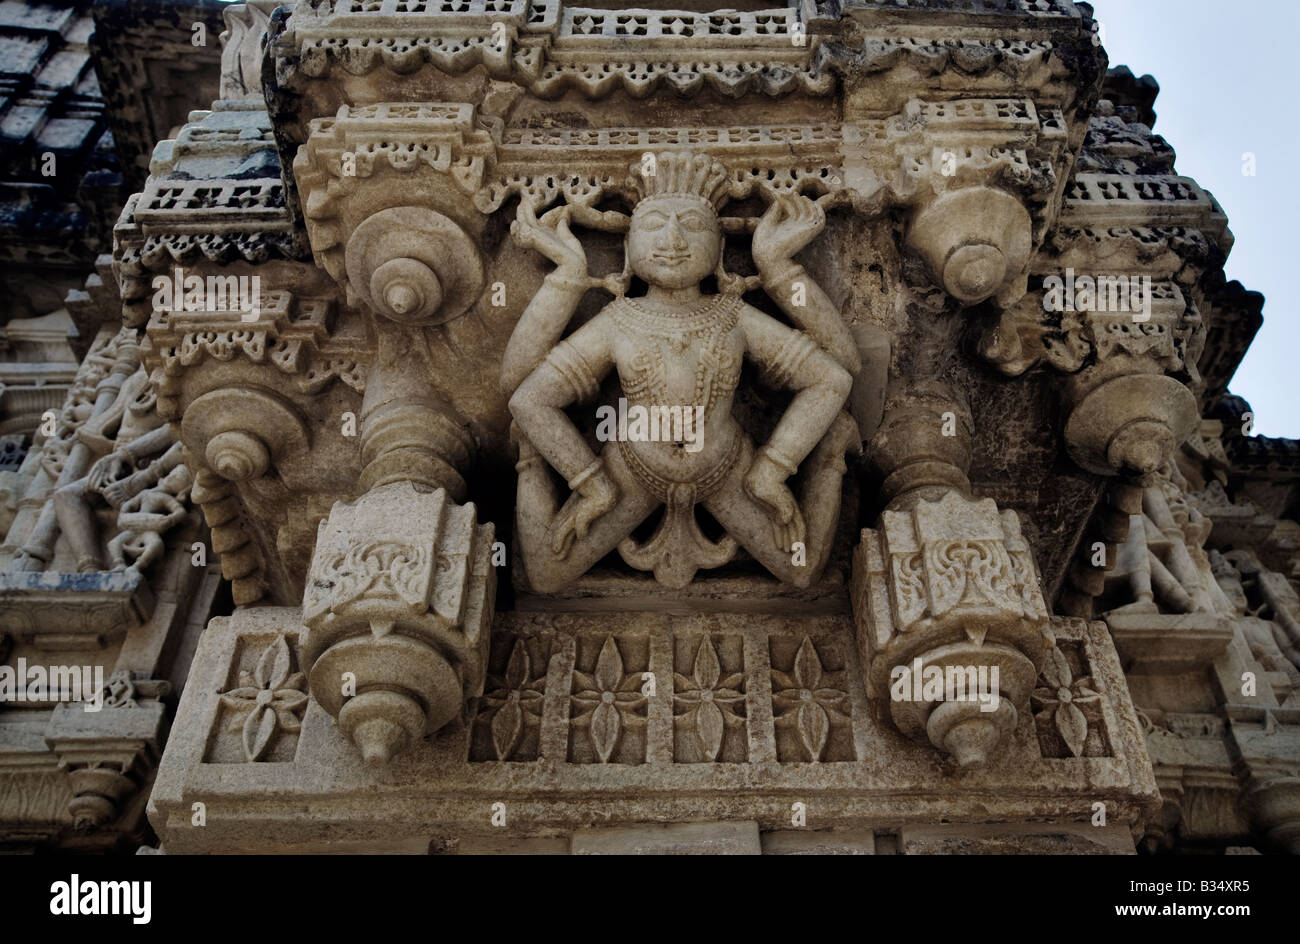 A CELESTIAL DEITY at a JAIN TEMPLE at RANAKPUR is carved out of white marble in the Pali District of RAJASTHAN near Sadri INDIA Stock Photo